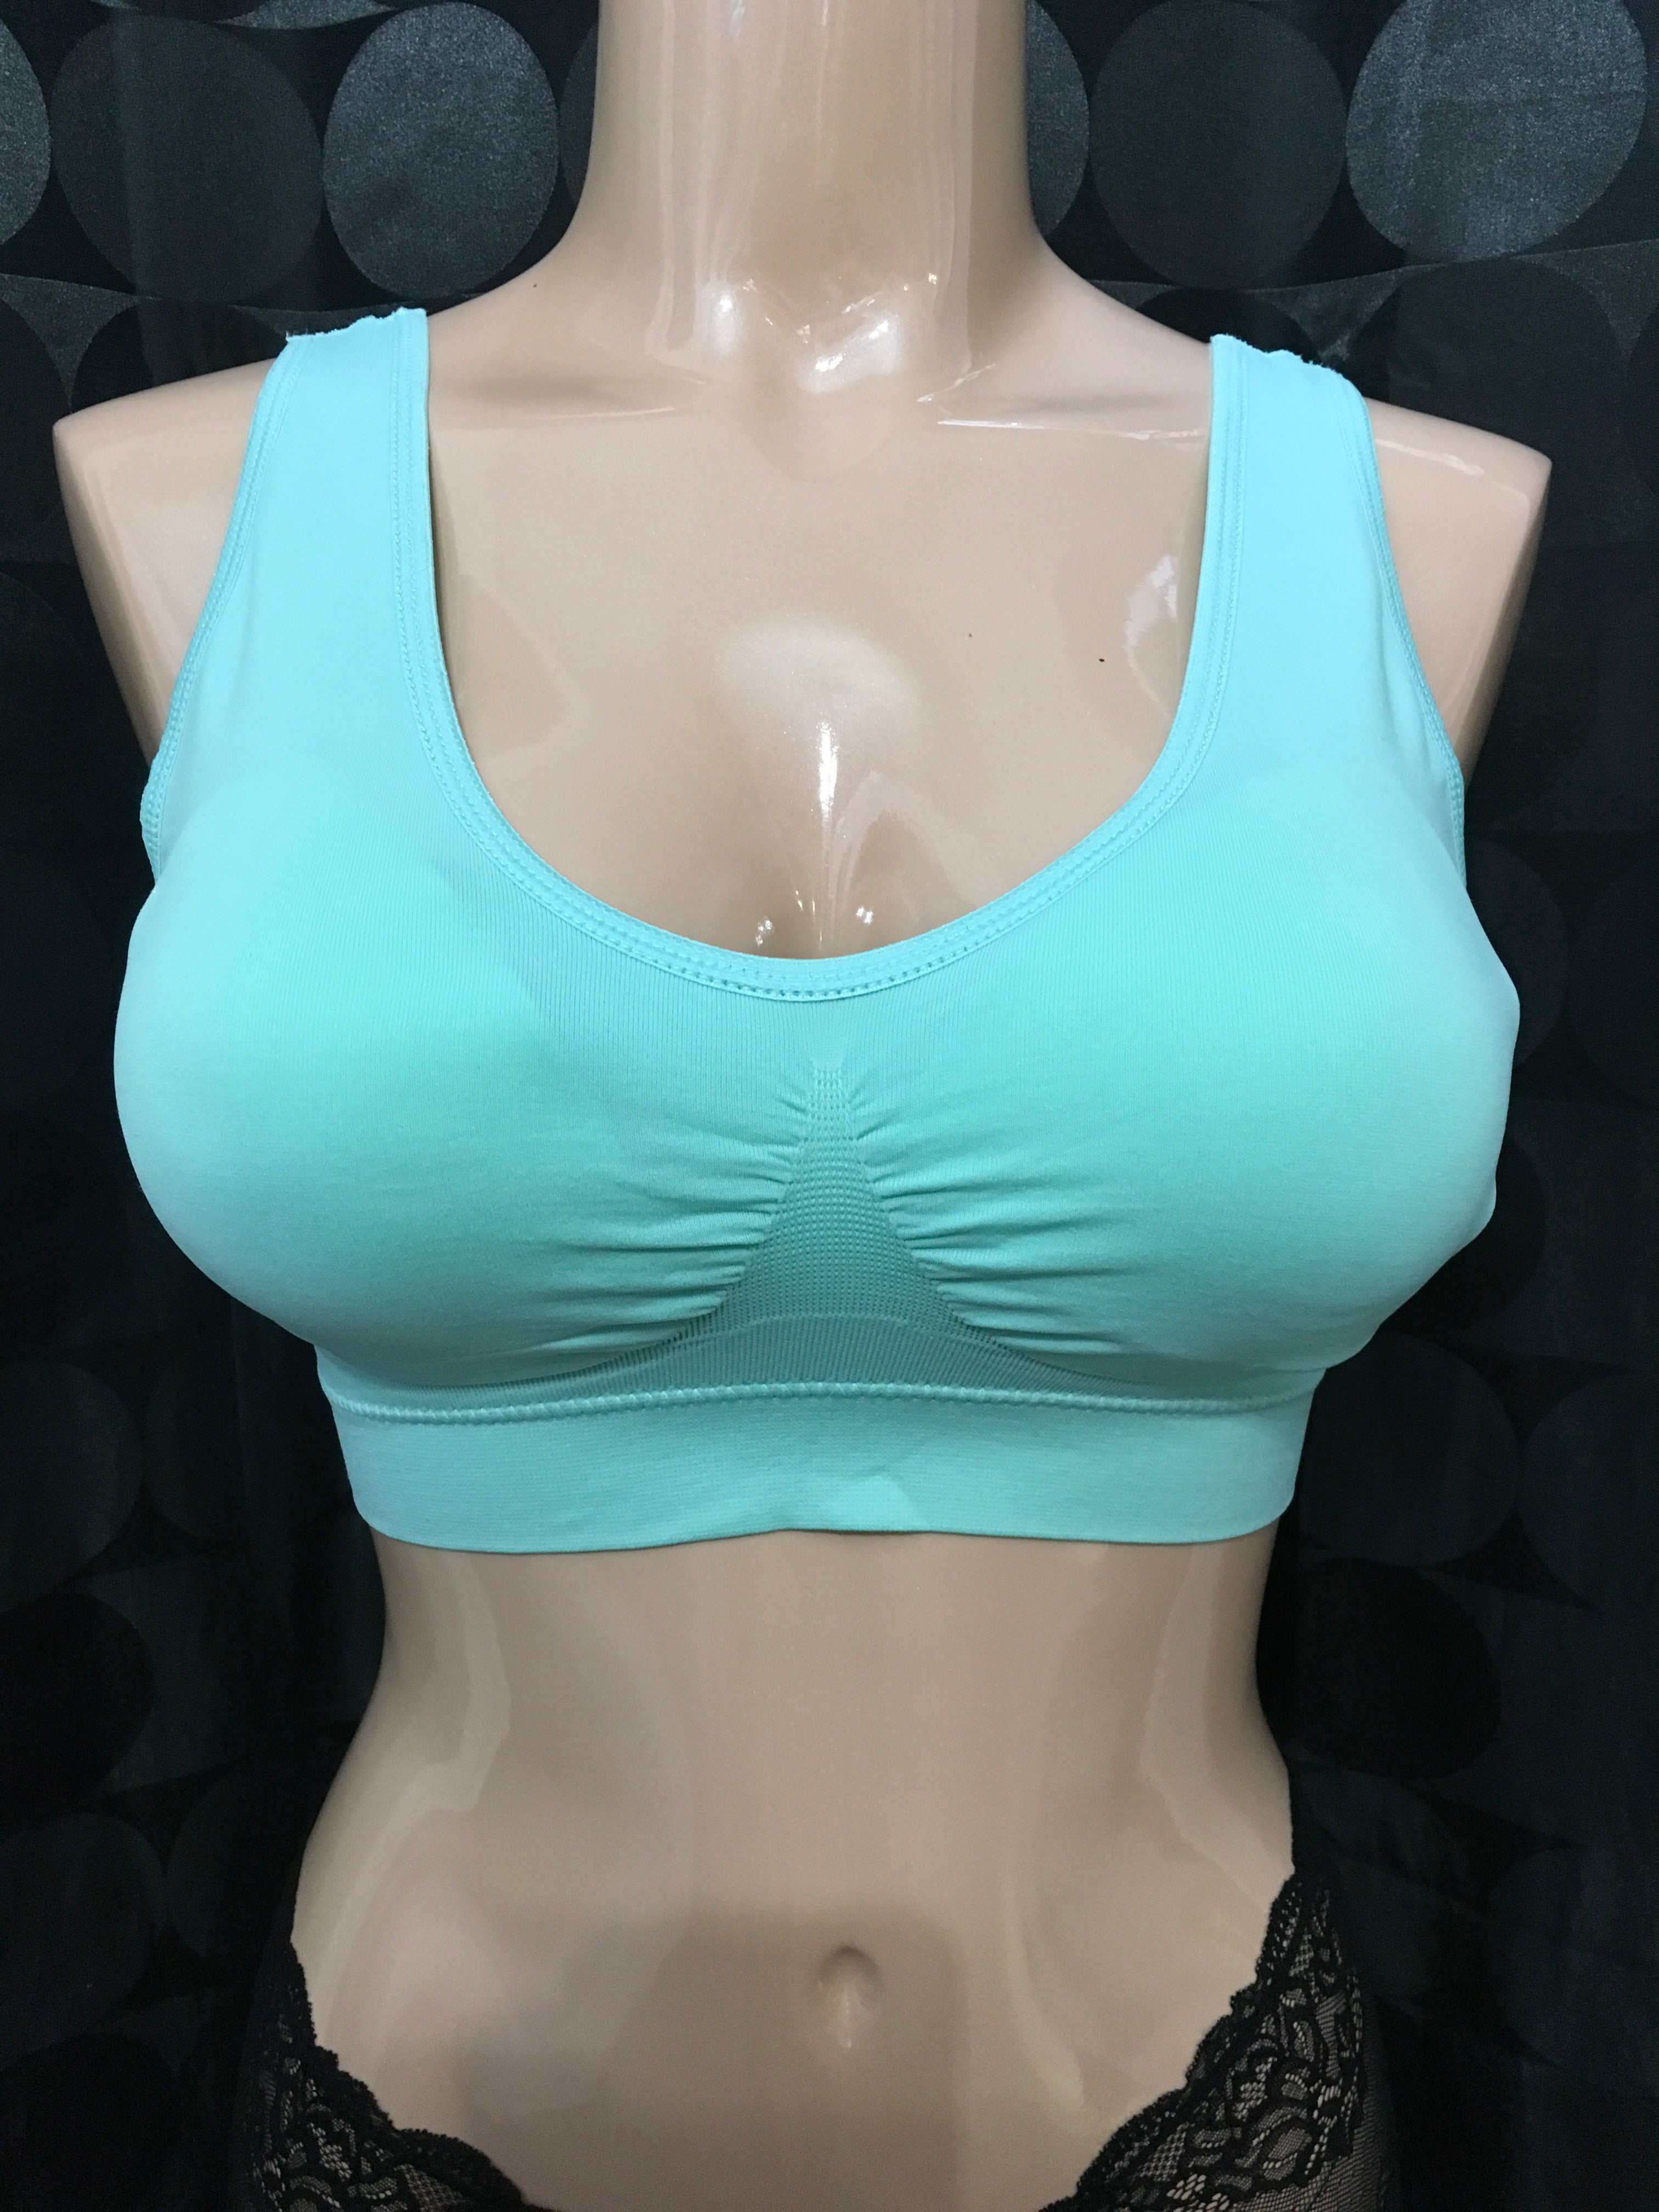 coobie bras - Shop, Welcome to The Coobie Bra Store, The World's Most  Comfortable Bra